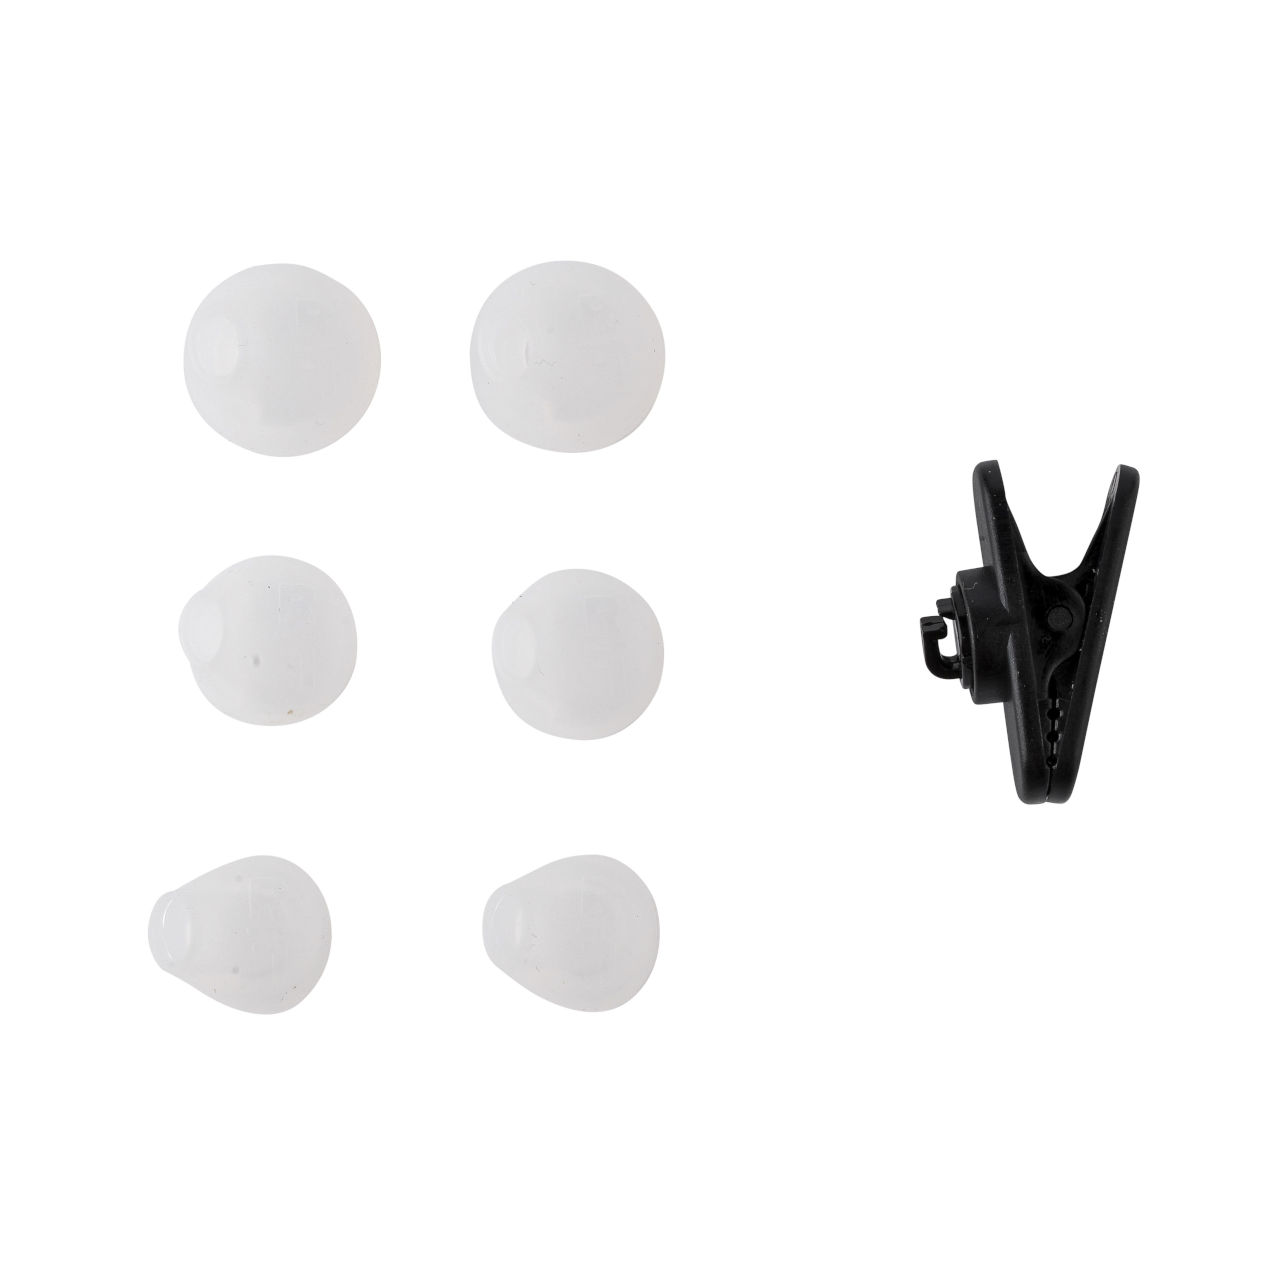 Motorola Replacement Ear Tip for Wirless Earbud